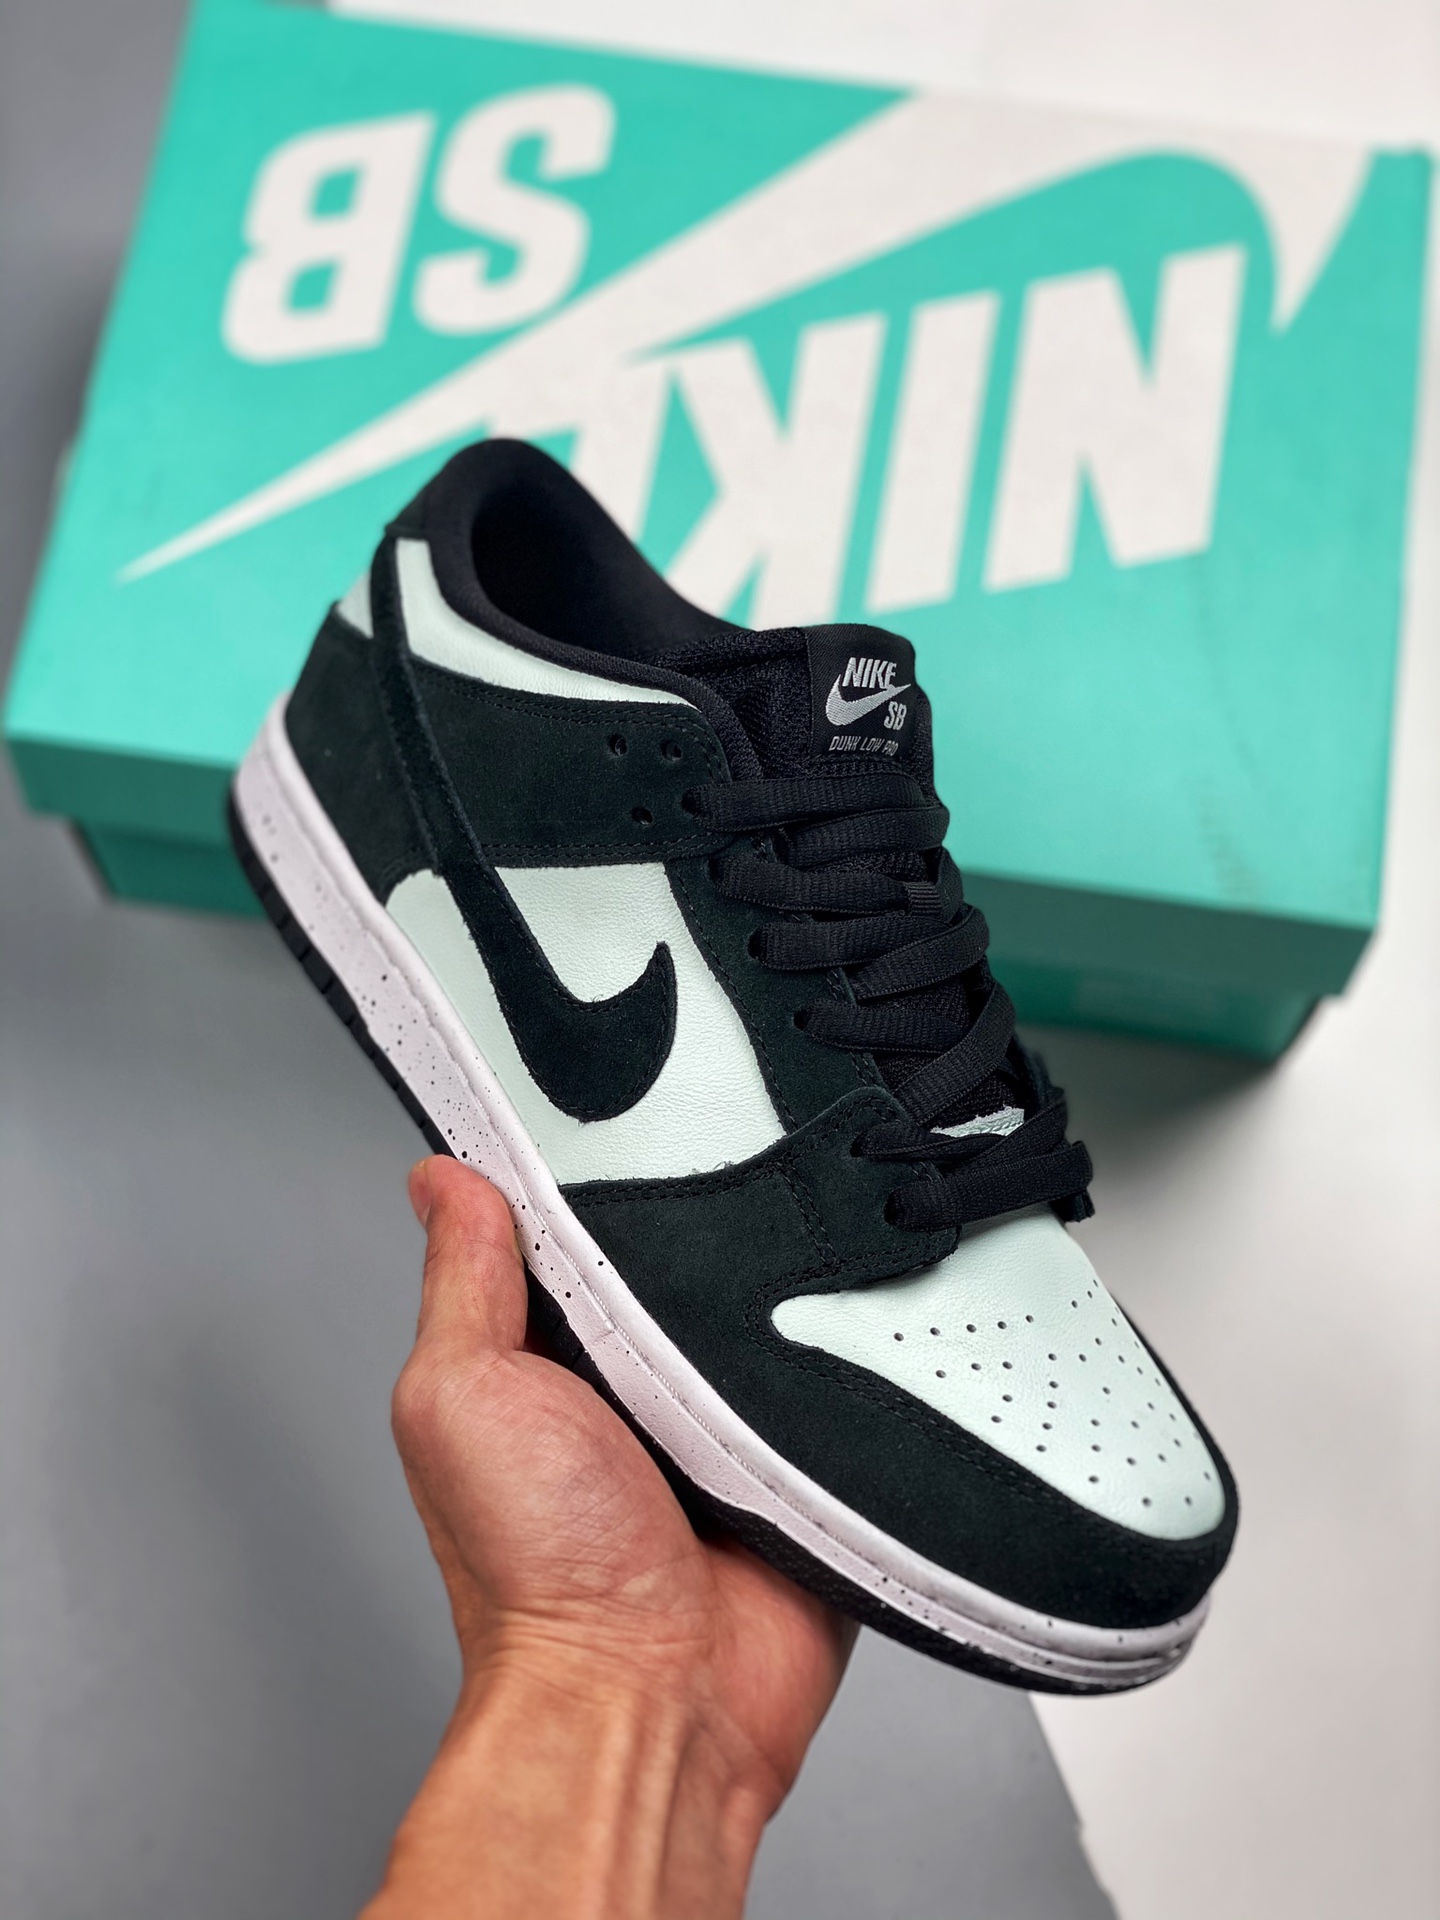 Nike SB Dunk Low Pro "Barely Green" 854866-003 Shoes